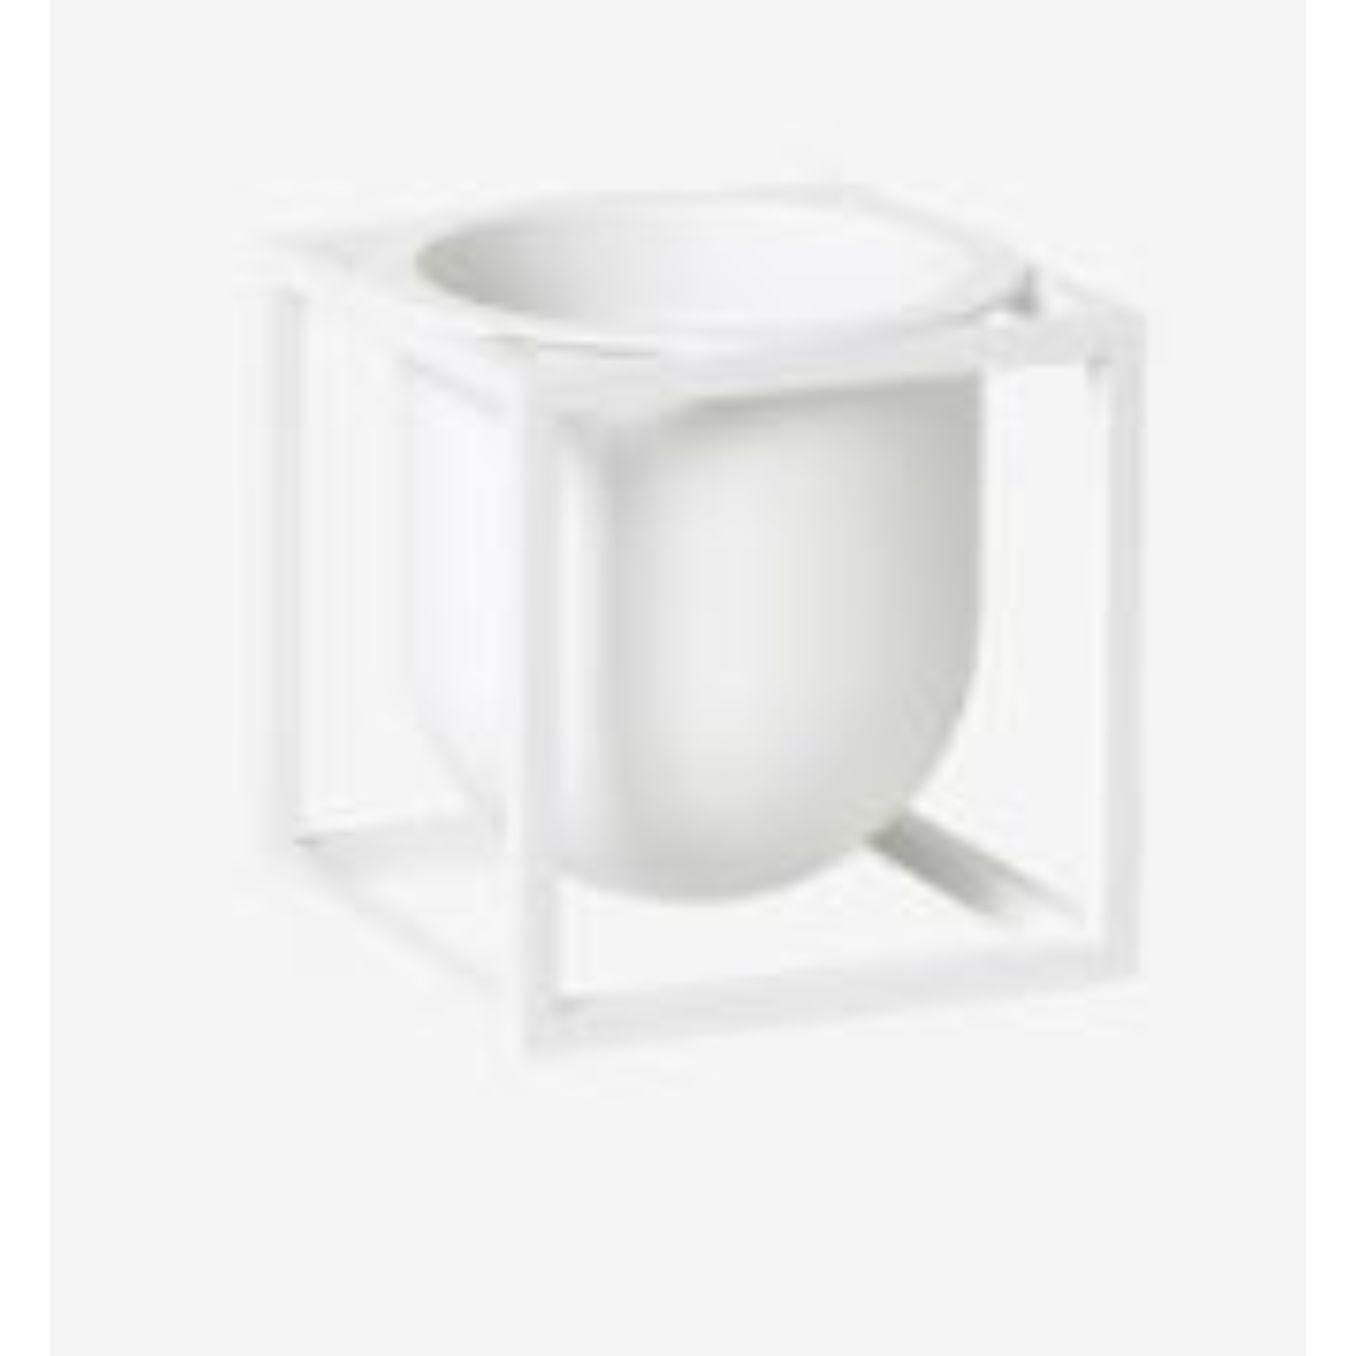 White flowerpot 10 Kubus vase by Lassen
Dimensions: D 10 x W 10 x H 10 cm 
Materials: Metal 
Weight: 0.75 Kg

Herb pot, vase or a simple container. The possibilities are endless. Another addition to the Kubus collection, Kubus Flowerpots come